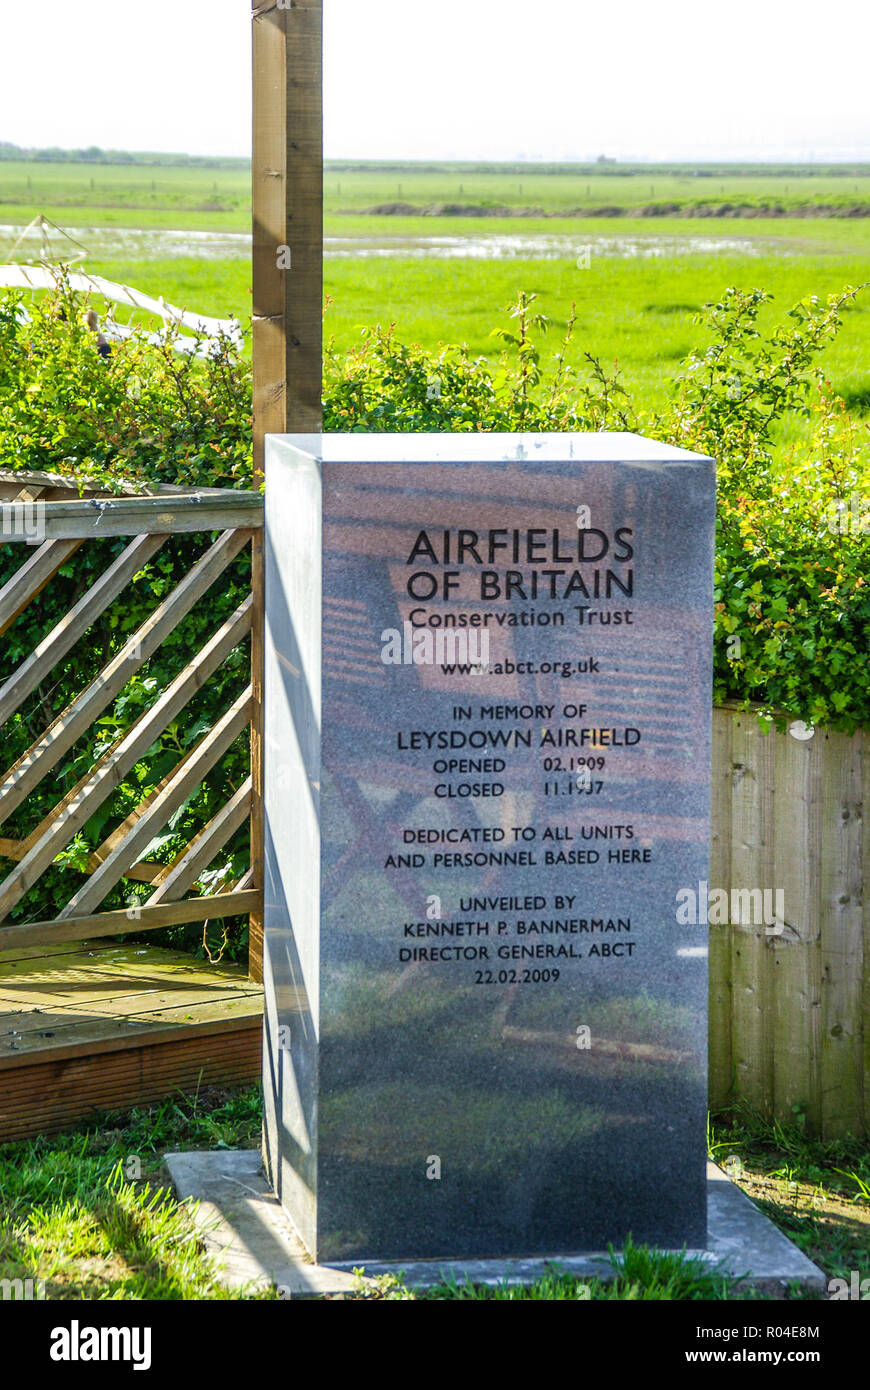 Airfields of Britain Conservation Trust dedicated stone. Muswell Manor at Leysdown on the Isle of Sheppey in Kent, UK, birthplace of British Aviation Stock Photo